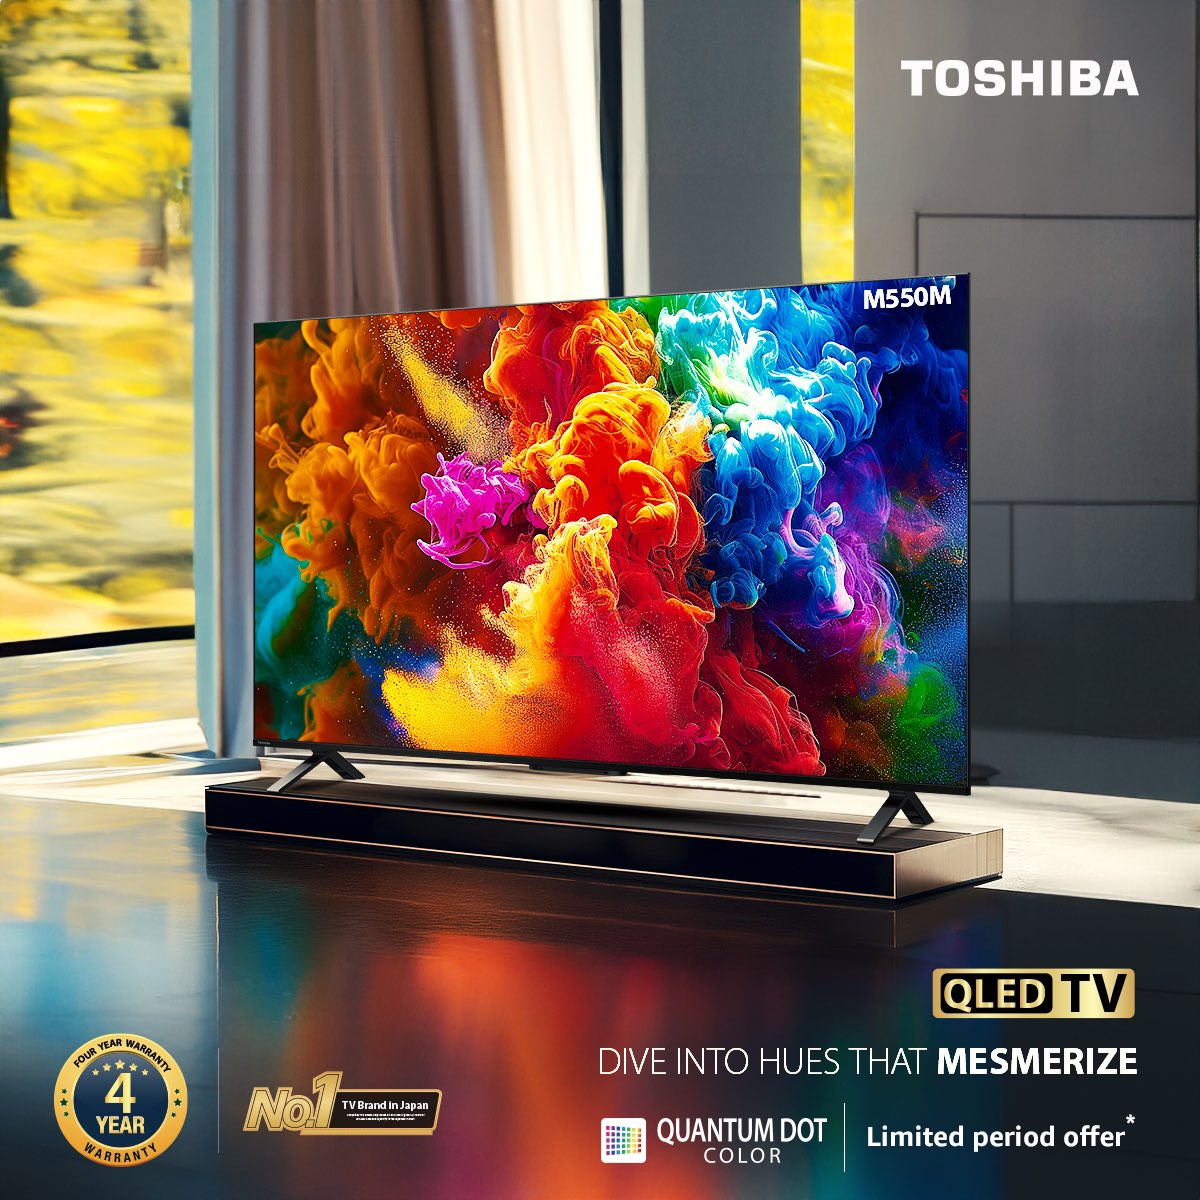 Explore the colors that feel like home with our Quantum Dot brilliance, featuring Toshiba #M550MP. Buy Now: bit.ly/3FsybuB #ToshibaTV #M550MP